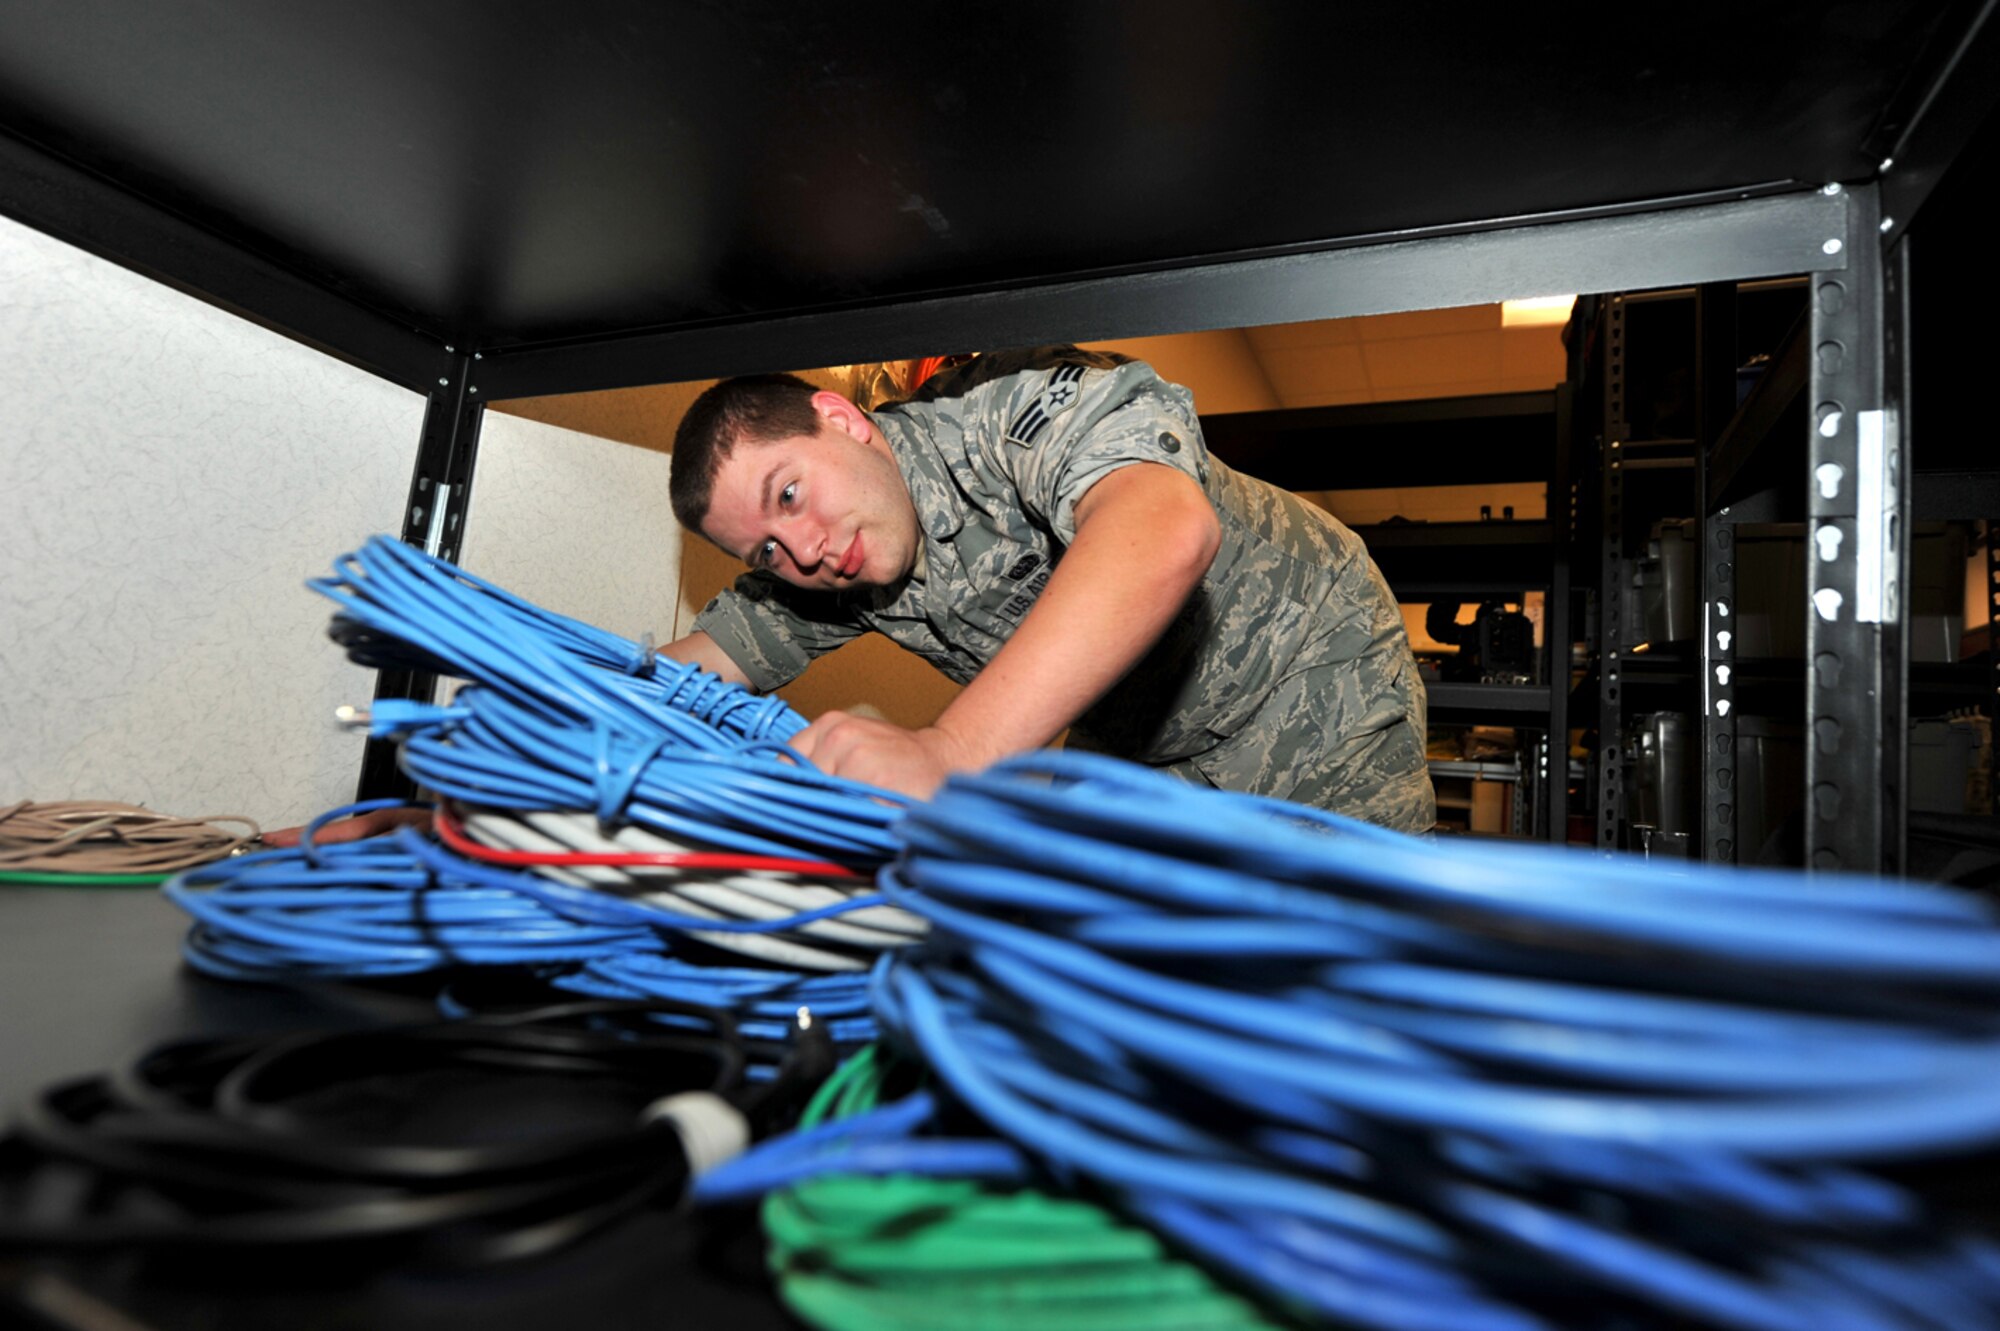 Senior Airman Lee Owens, former 42nd Air Base Wing broadcast engineer, secures local area network cables on a storage shelf, July 24, 2014. Owens was one of more than 3,500 Airmen selected for separation after being identified by the Air Force's first Quality Force Review Board. After five years in uniform Owens faces rejoining the civilian sector with a smile and an appreciation for the military. (U.S. Air Force photo by Master Sgt. Michael Voss)  